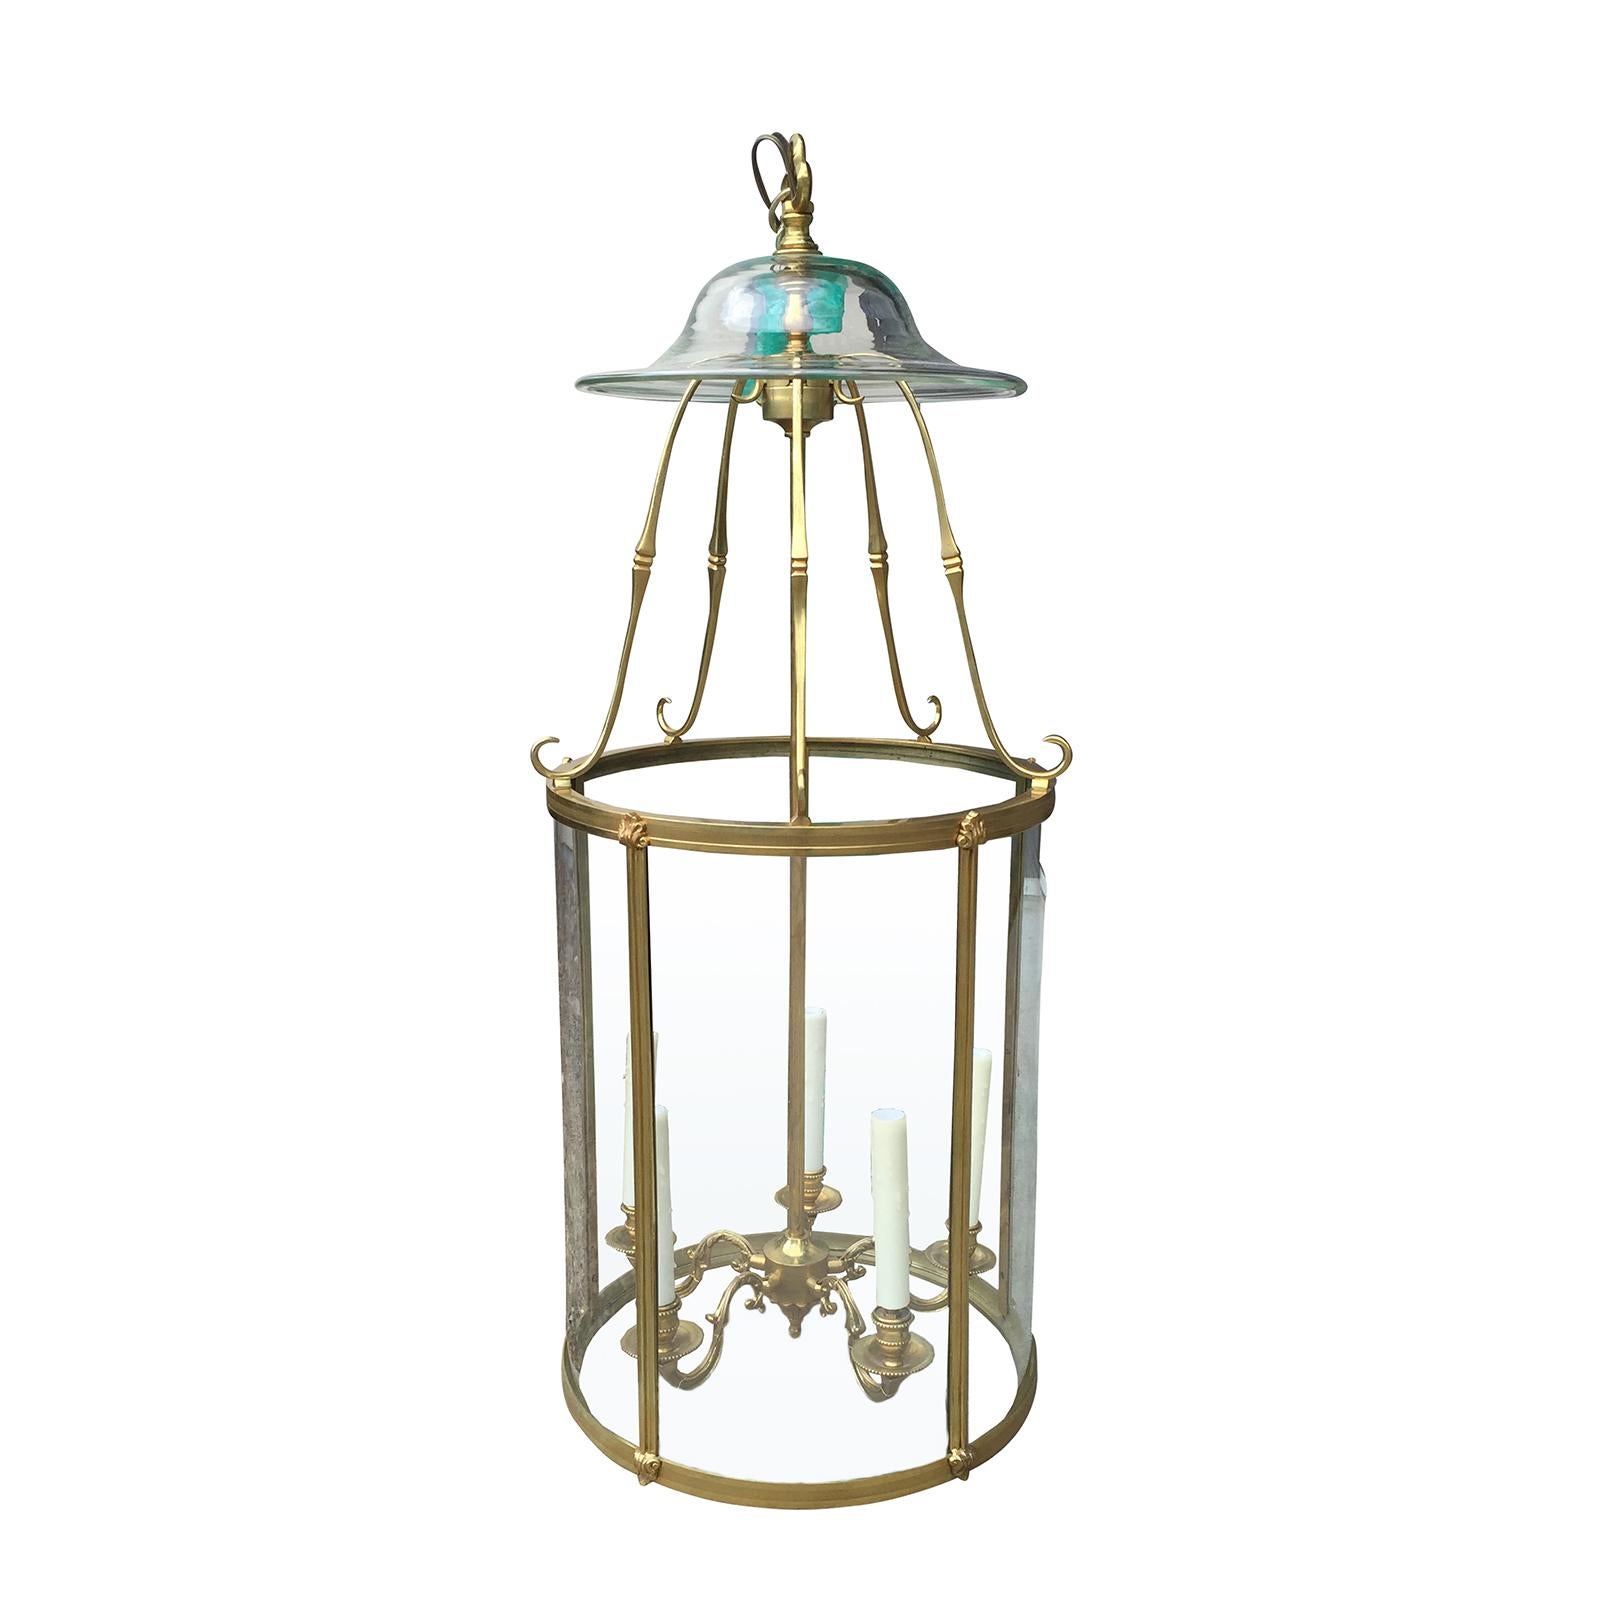 19th Century Neoclassical Curved Glass and Brass Lantern with Smoke Bell